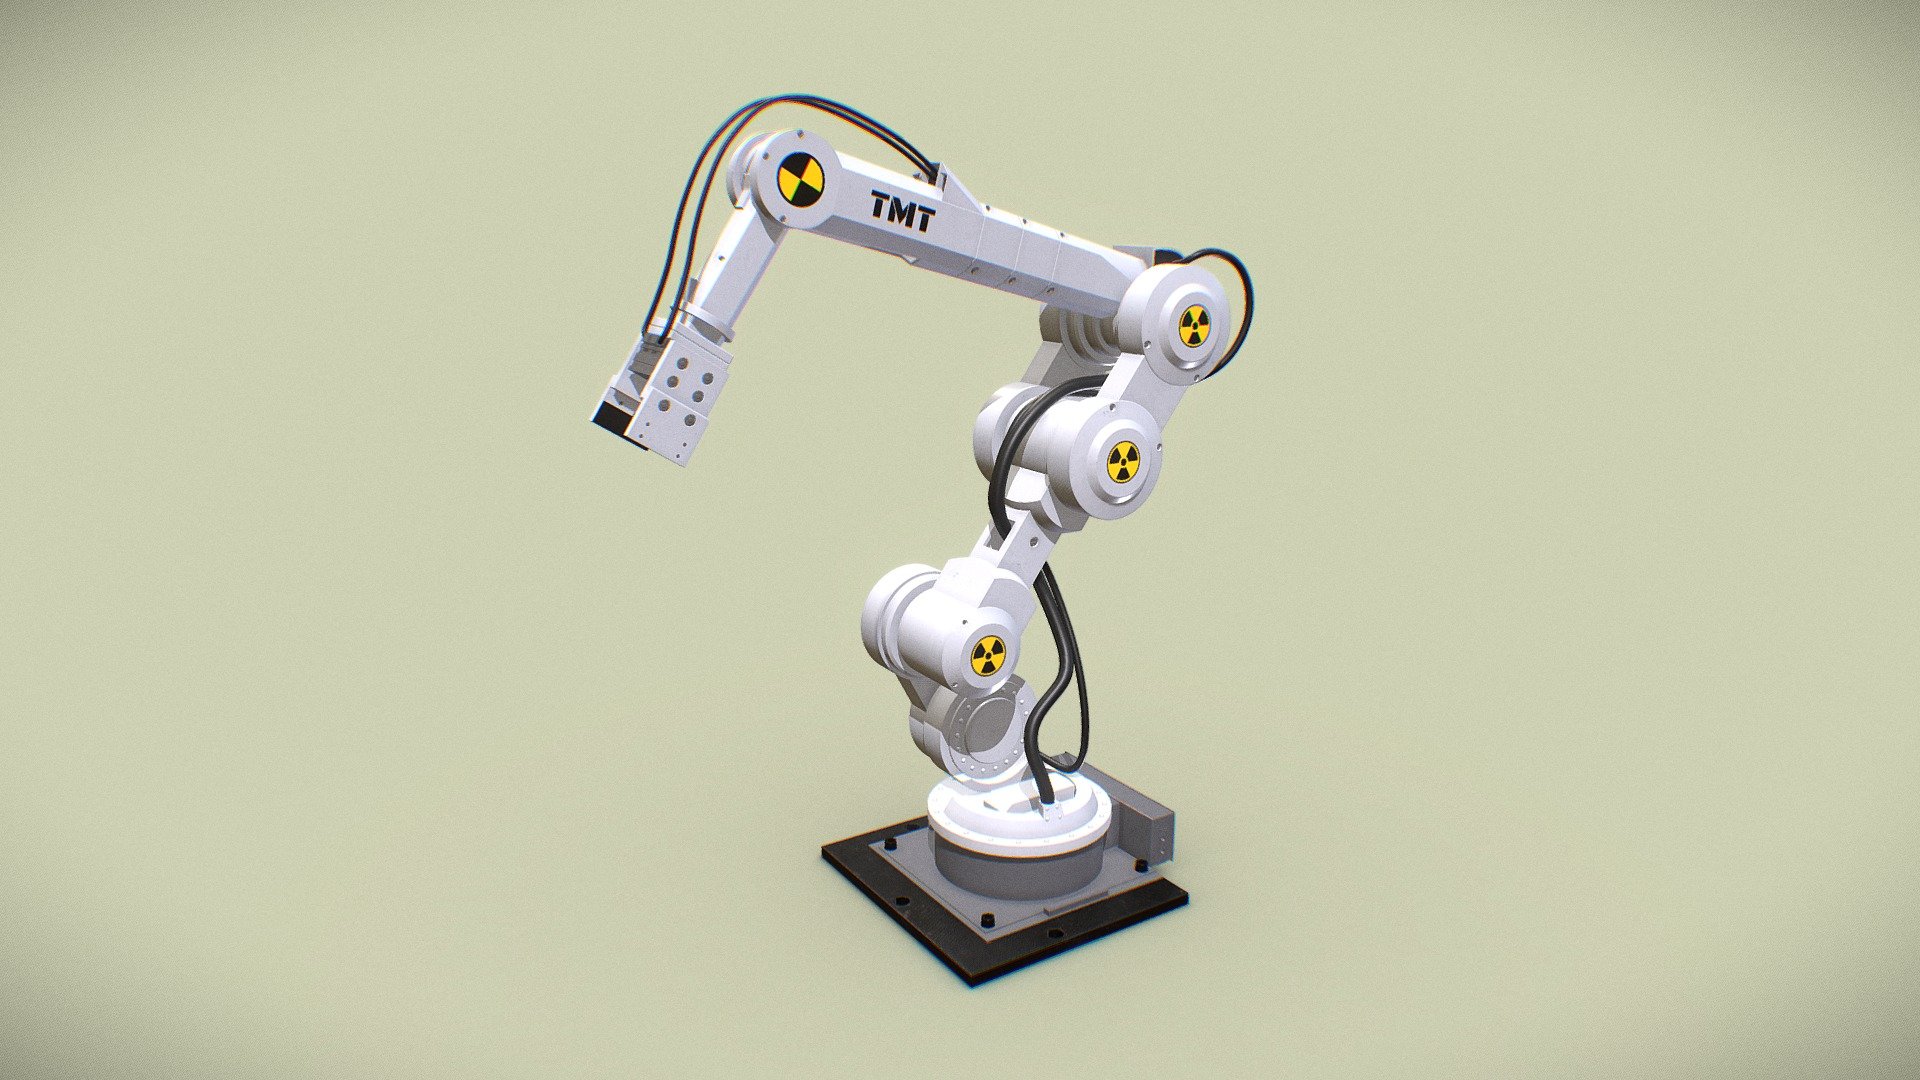 High-quality and realistic 3D Industrial Robotic Arm. Perfect for use in any project. This is an excellent choice for promotional shots, interior, exterior, studio, and Realtime visualization. Can be used wherever you might need it. Large-resolution high-quality and highly detailed texture maps. This allows you to make any render, even close-up renders with great detail.



Textures:

All textures are made in PNG format, resolution 2048*2048px.

Archives include two versions of normal maps: one main - with embossing(complete with models), the second one - without embossing (available in a separate archive). See the thumbnails for more details.



Archives available for download:

Robotic Arm_3dsmax

Robotic Arm_FBX

Robotic Arm_OBJ

Geometry:            

Total: Polys -82057 / Verts - 81600 - Robotic Arm - 3D model by The Motion Tree (@themotiontree) 3d model